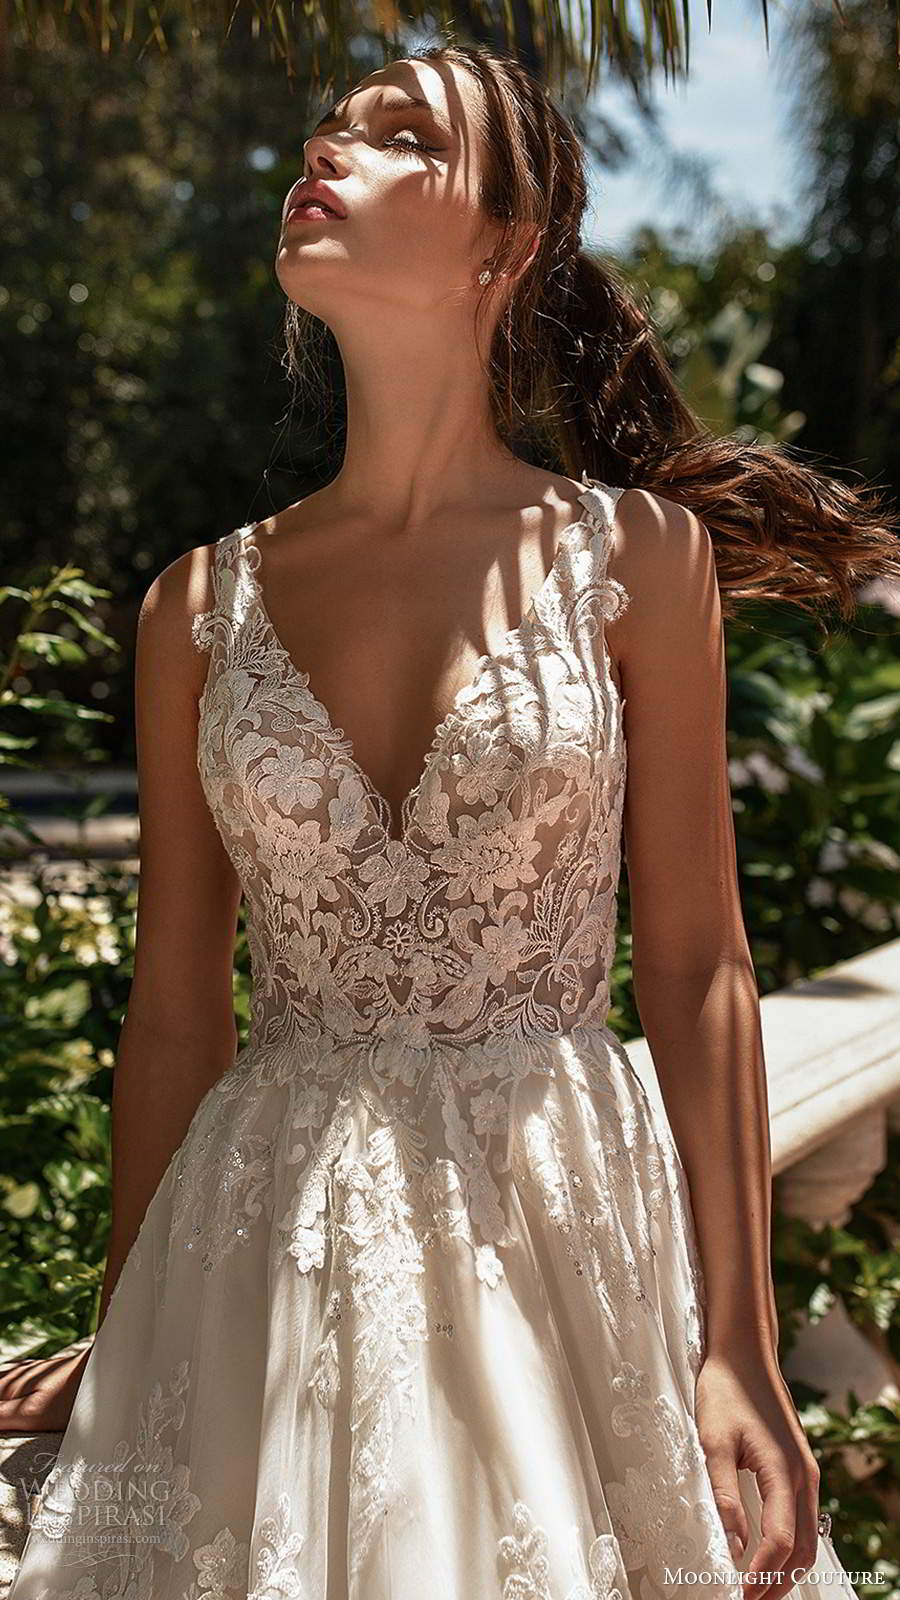 moonlight couture spring 2020 bridal sleeveless illusion straps v neckline fully embellished a line ball gown wedding dress keyhole back chapel train (9) zv